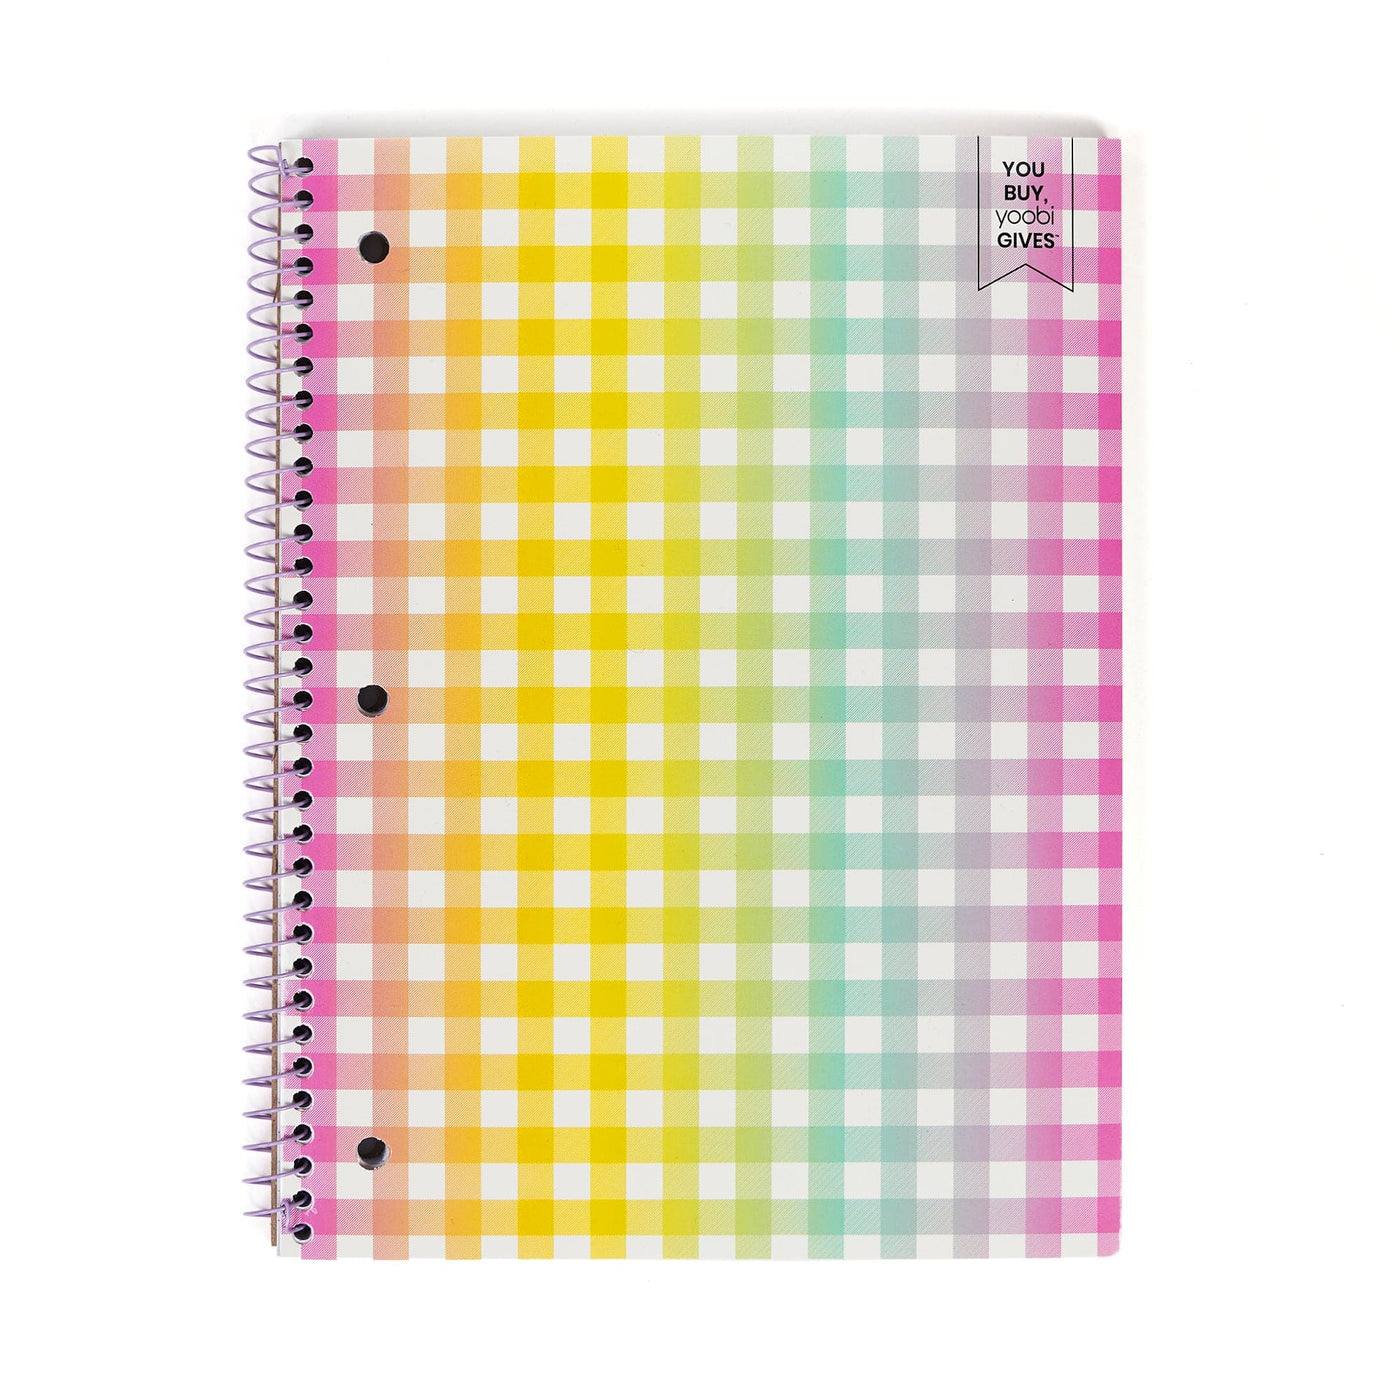  Yoobi College-Ruled Spiral Notebooks with Pencil